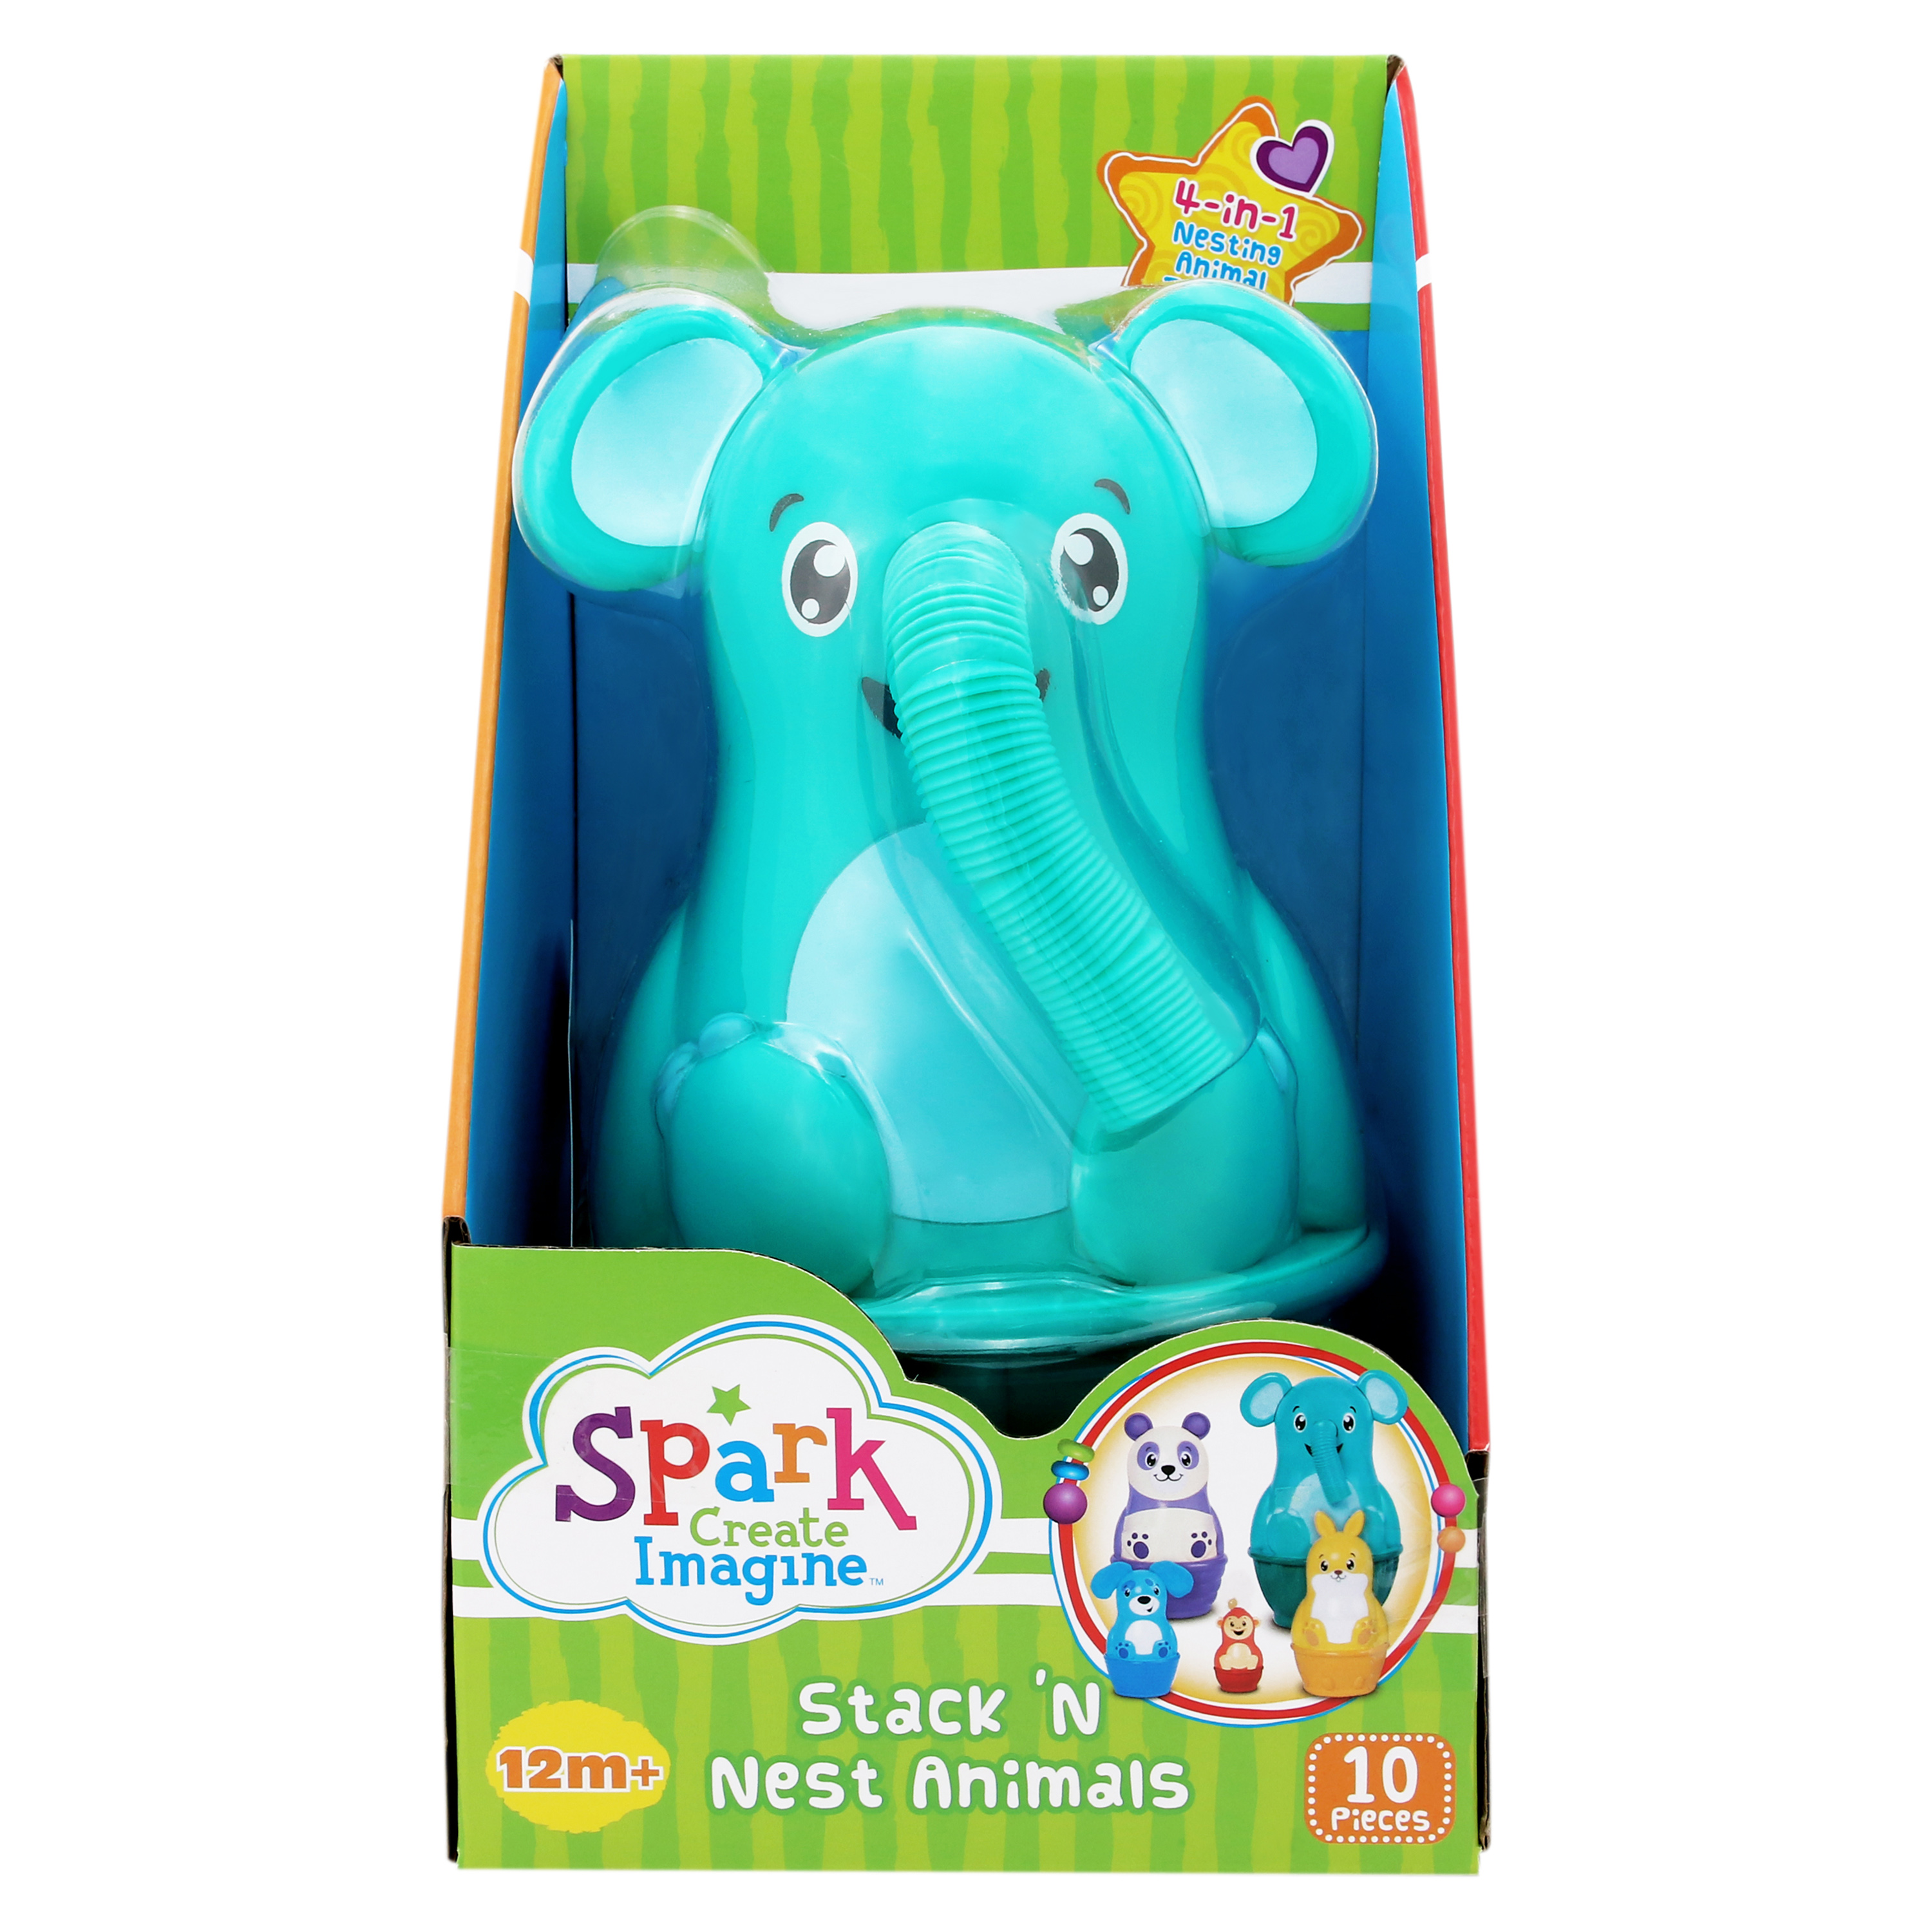 Spark Create Imagine Stack ‘N Nest Animals Toy Set 5 Nesting Pets 5 Stackable Cups Kids, 12 Months+, Unisex - image 2 of 8